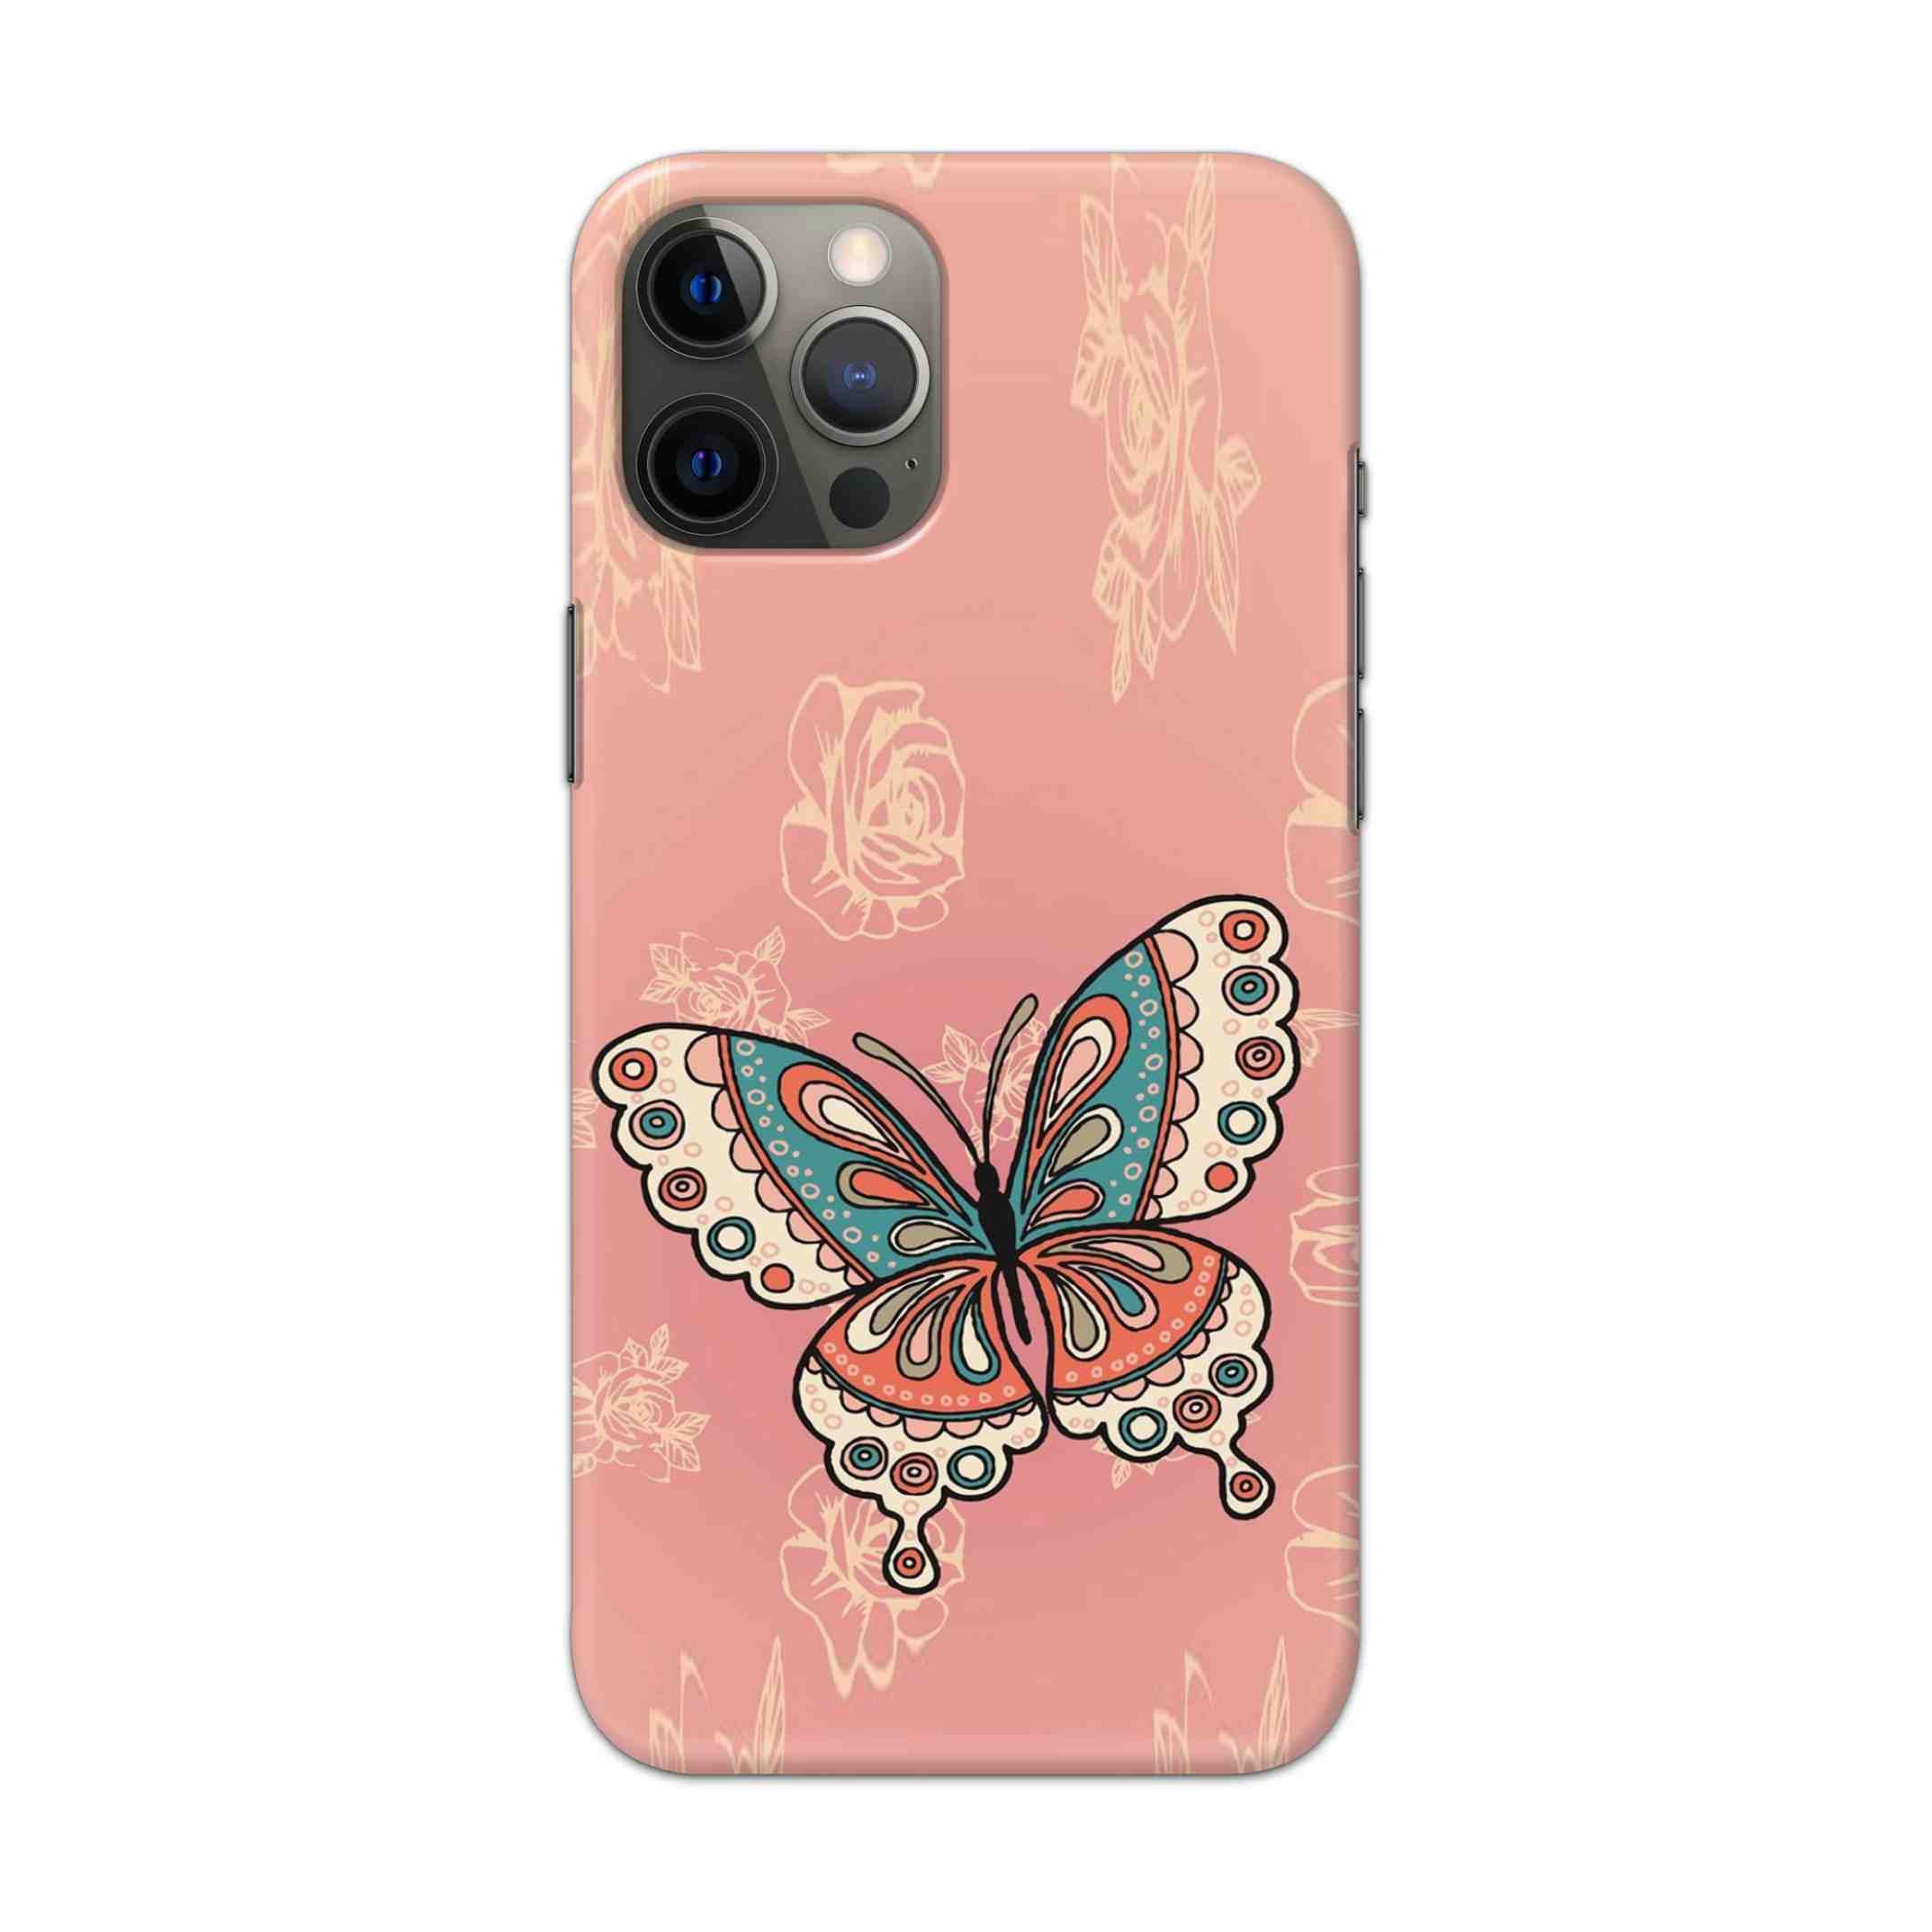 Buy Butterfly Hard Back Mobile Phone Case/Cover For Apple iPhone 12 pro max Online